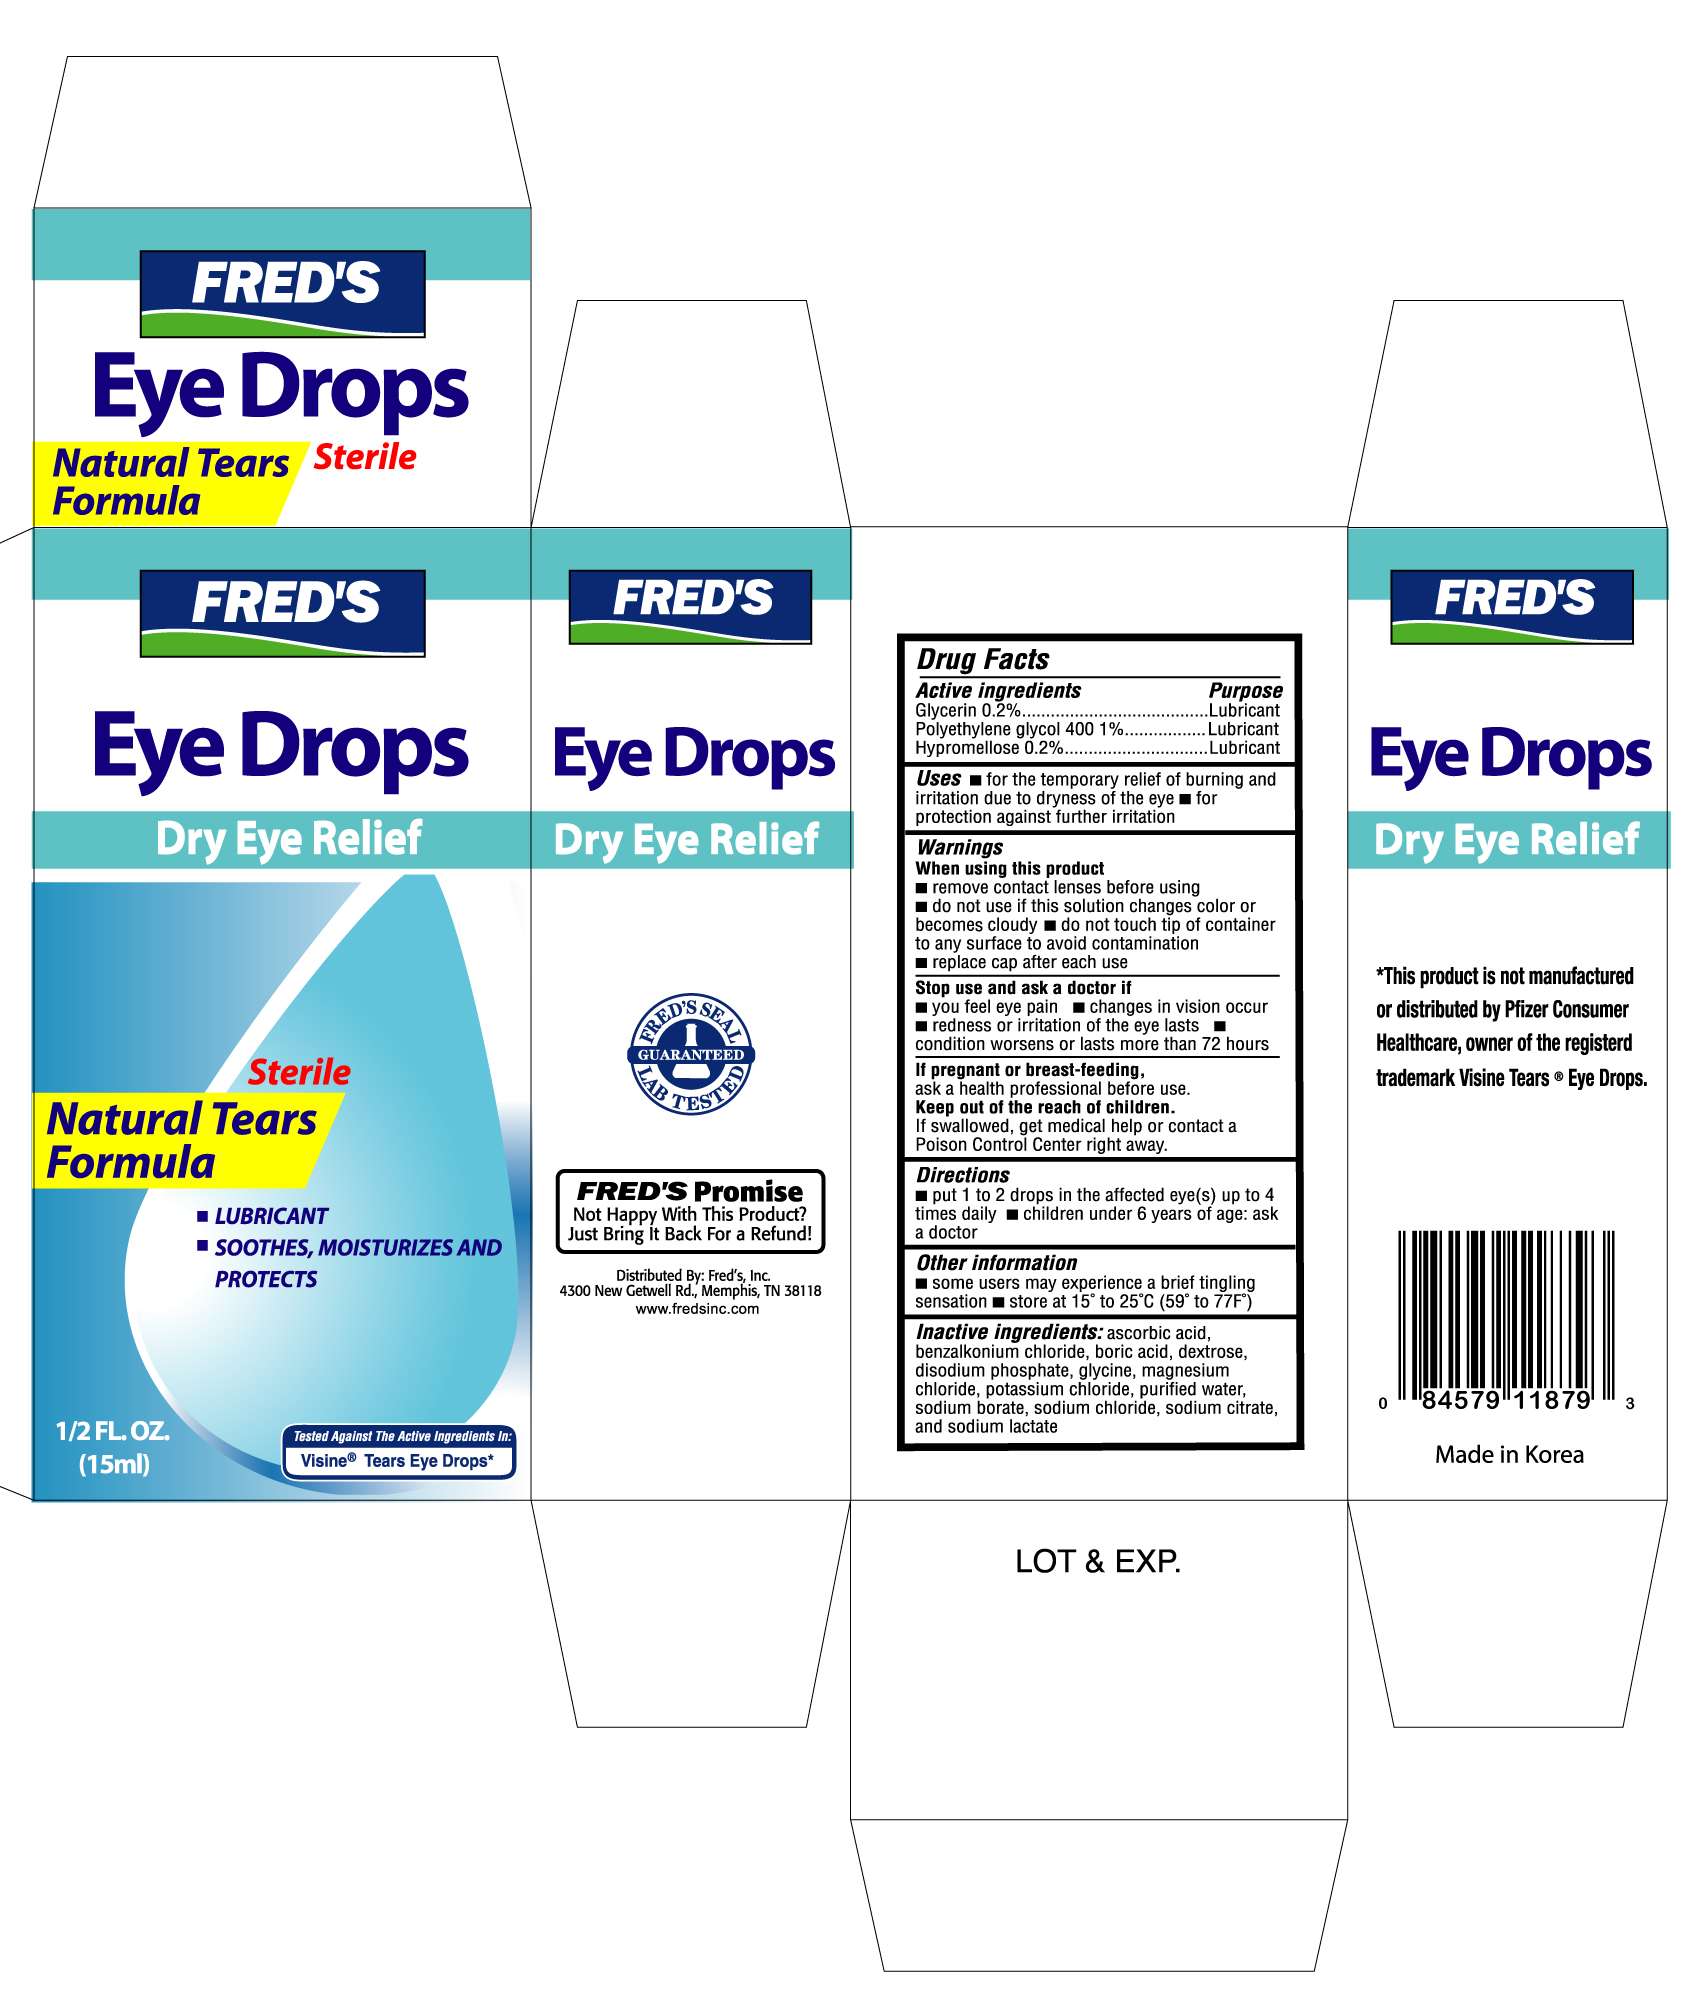 FREDS DRY EYE RELIEF